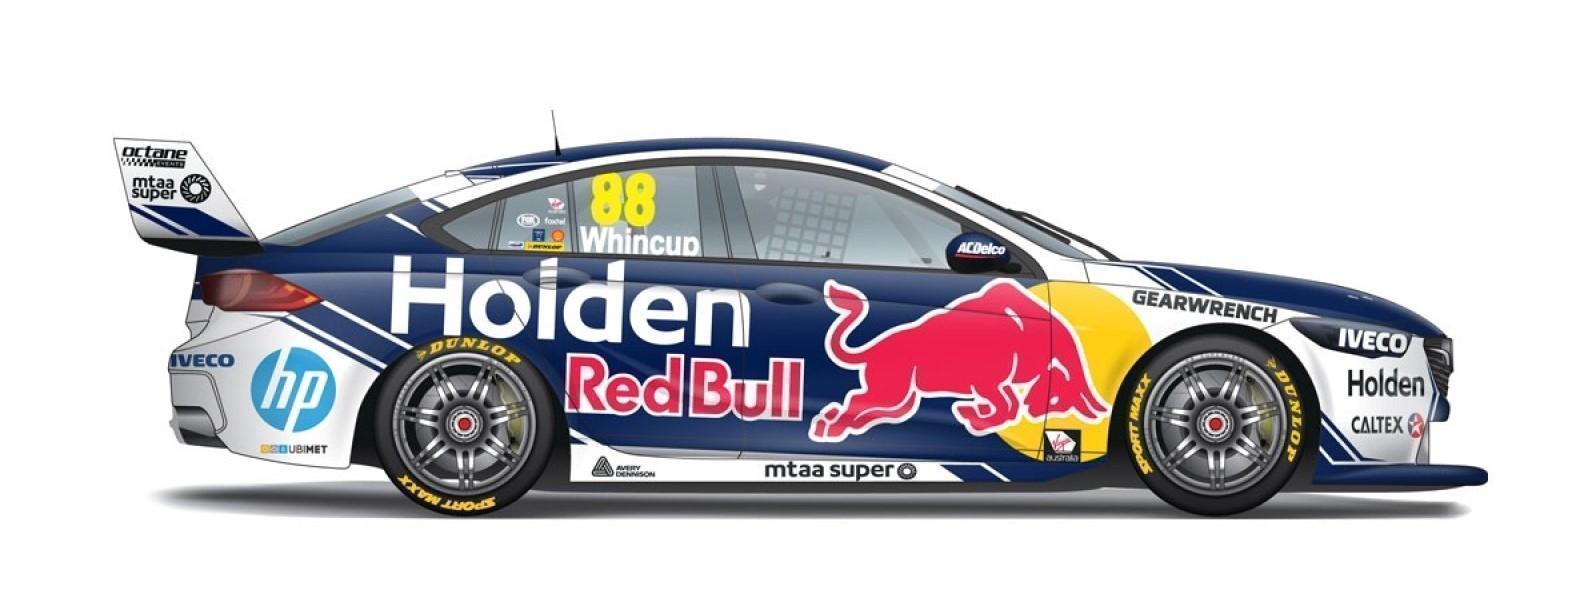 PRE ORDER - 2020 #88 Jamie Whincup Red Bull Holden Racing Team Season Car Holden ZB Commodore 1:18 Scale Model Car (FULL PRICE - $179.00*)